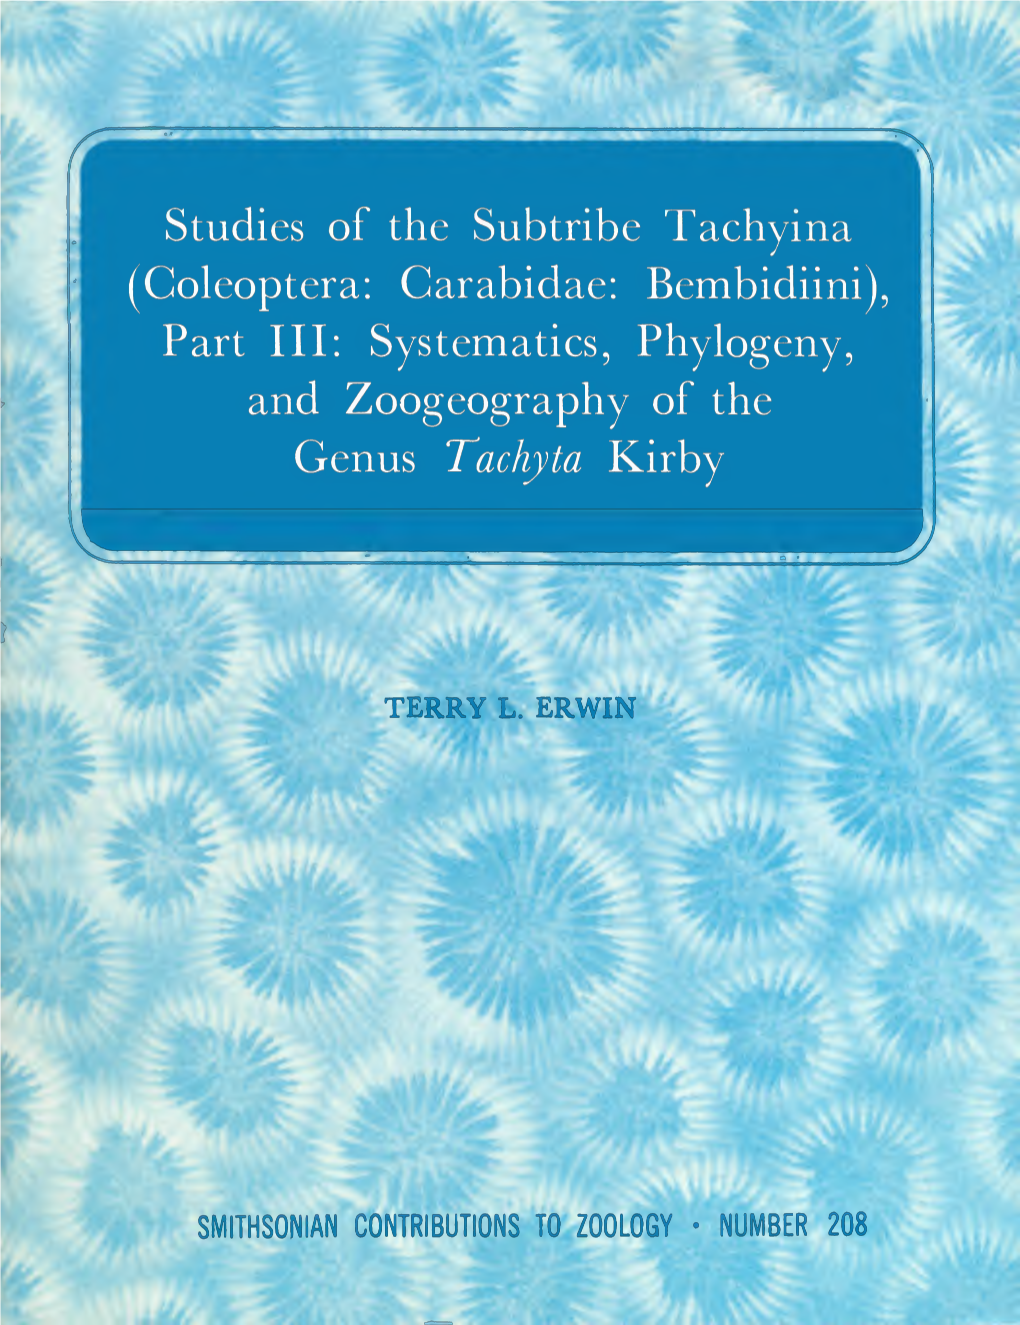 Systematics, Phylogeny, and Zoogeography of the Genus Tachyta Kirby